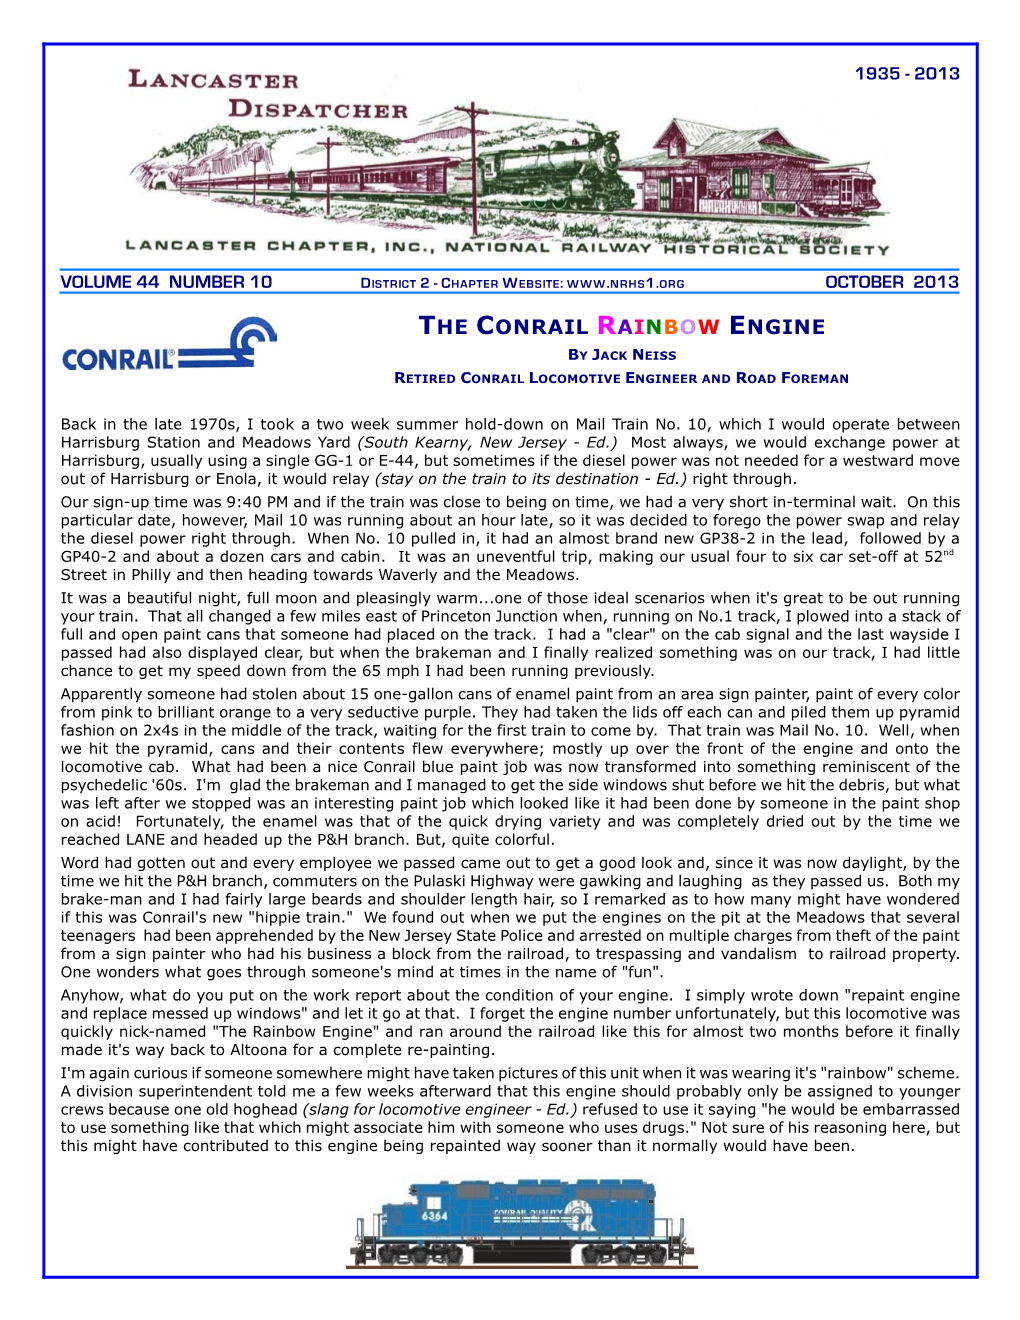 The Conrail Rainbow Engine by Jack Neiss Retired Conrail Locomotive Engineer and Road Foreman